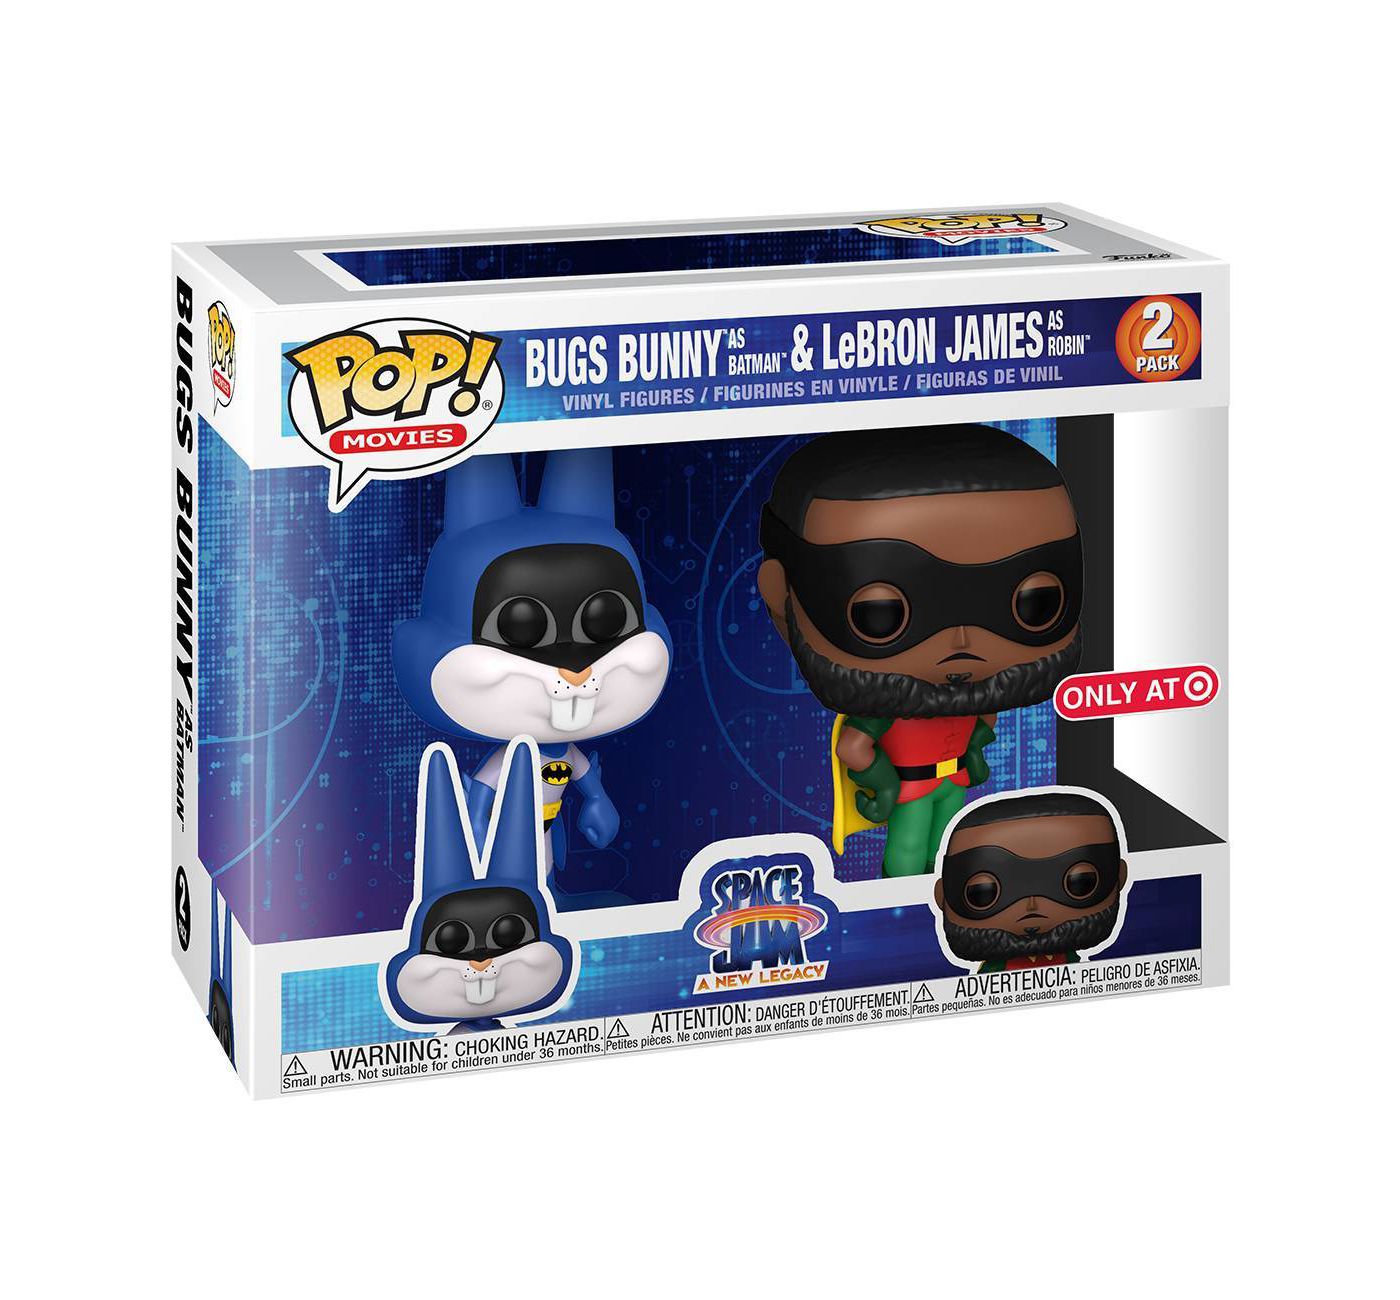 Movies: Space Jam 2: Bugs Bunny as Batman & LeBron James as Robin 2 Pack (Target Exclusive)